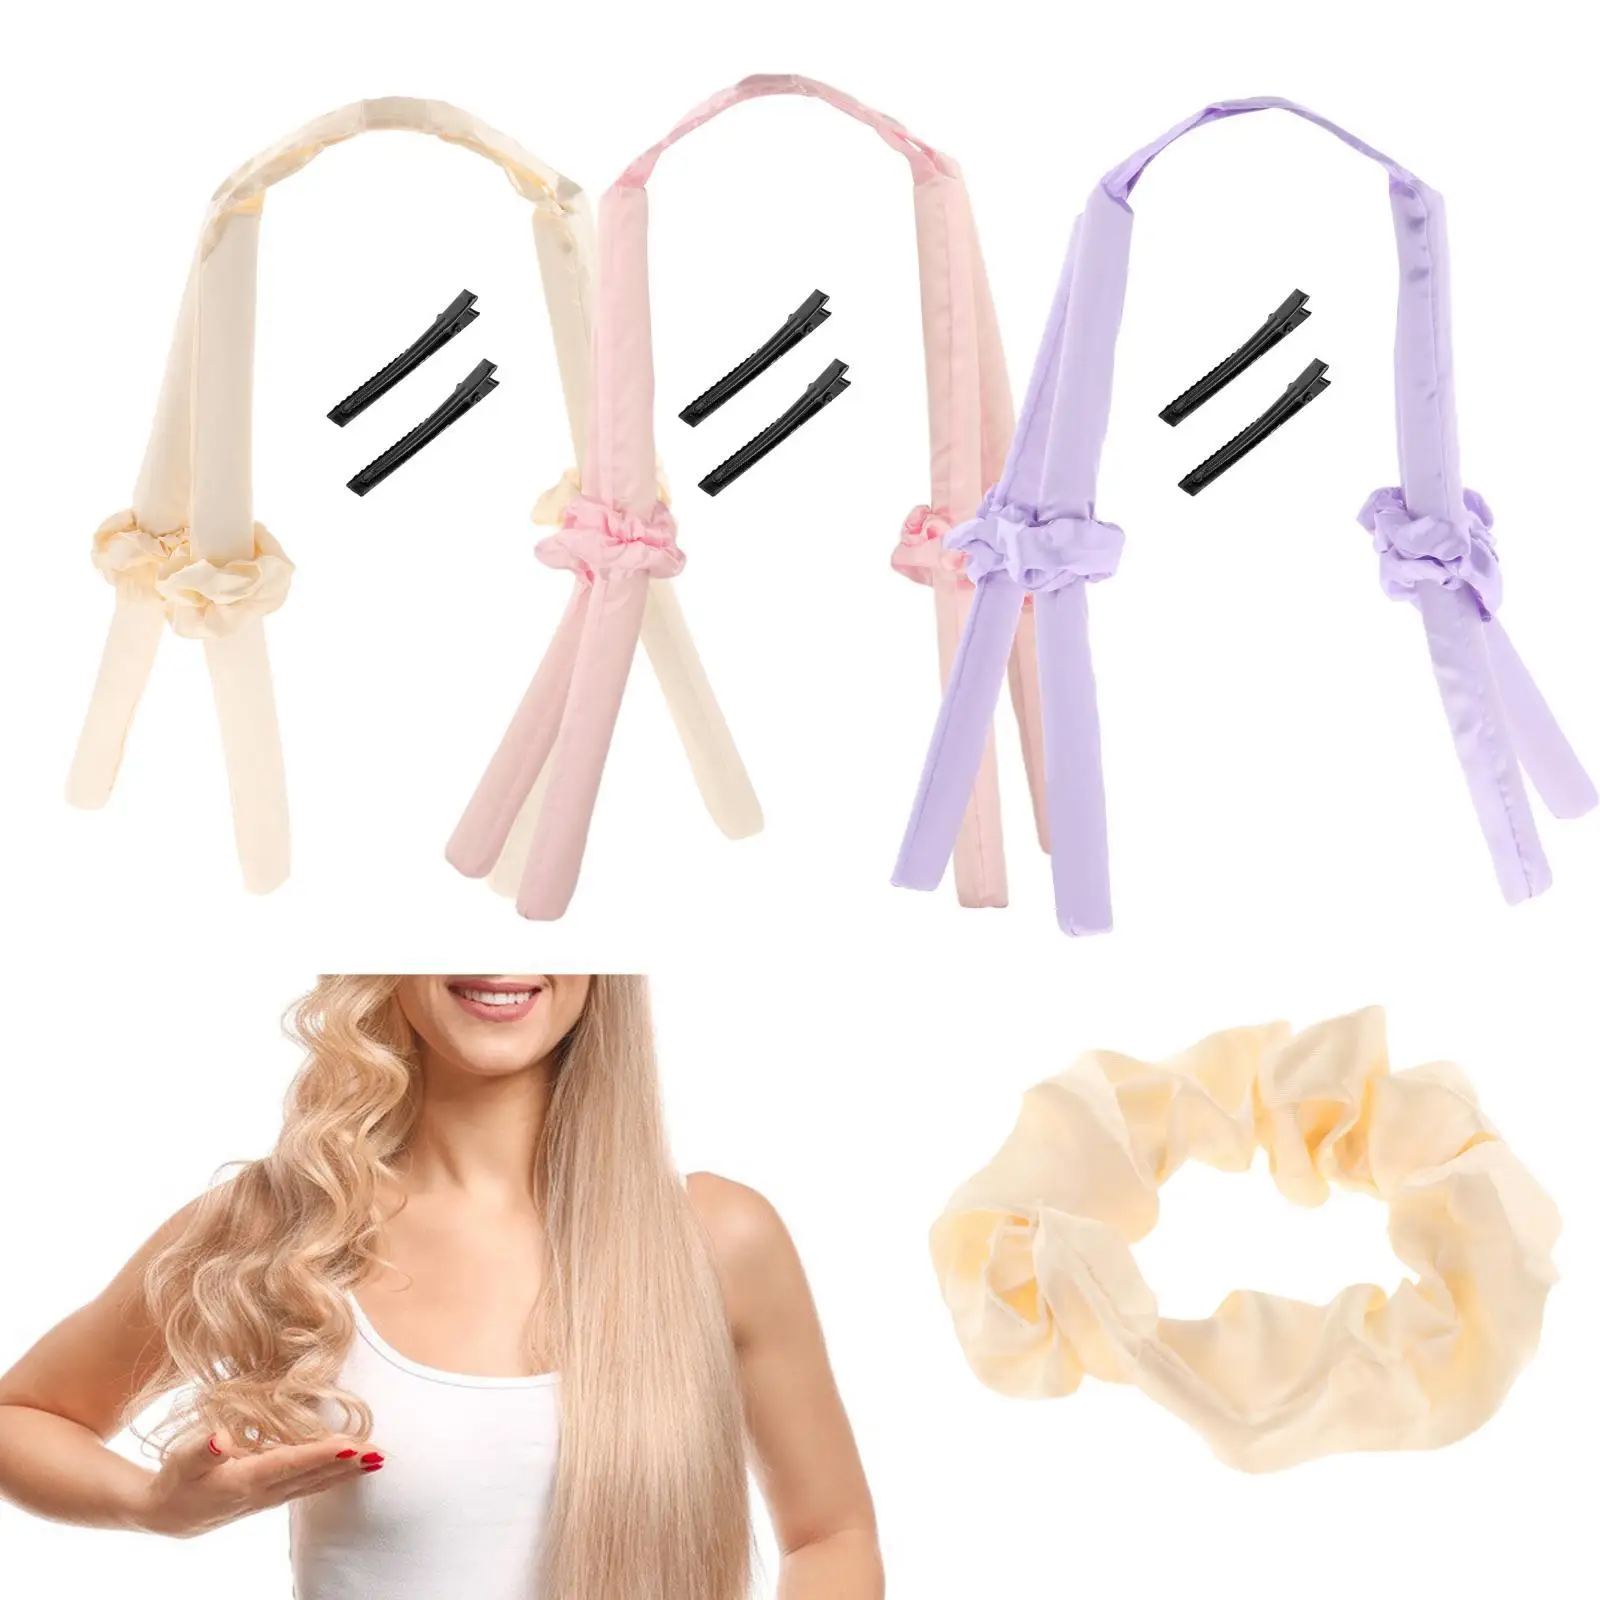 Heatless Curling Rod Headband, No Heat Overnight DIY Curling Ribbon Hair Rollers Rods for Natural Hair Sleep in Overnight